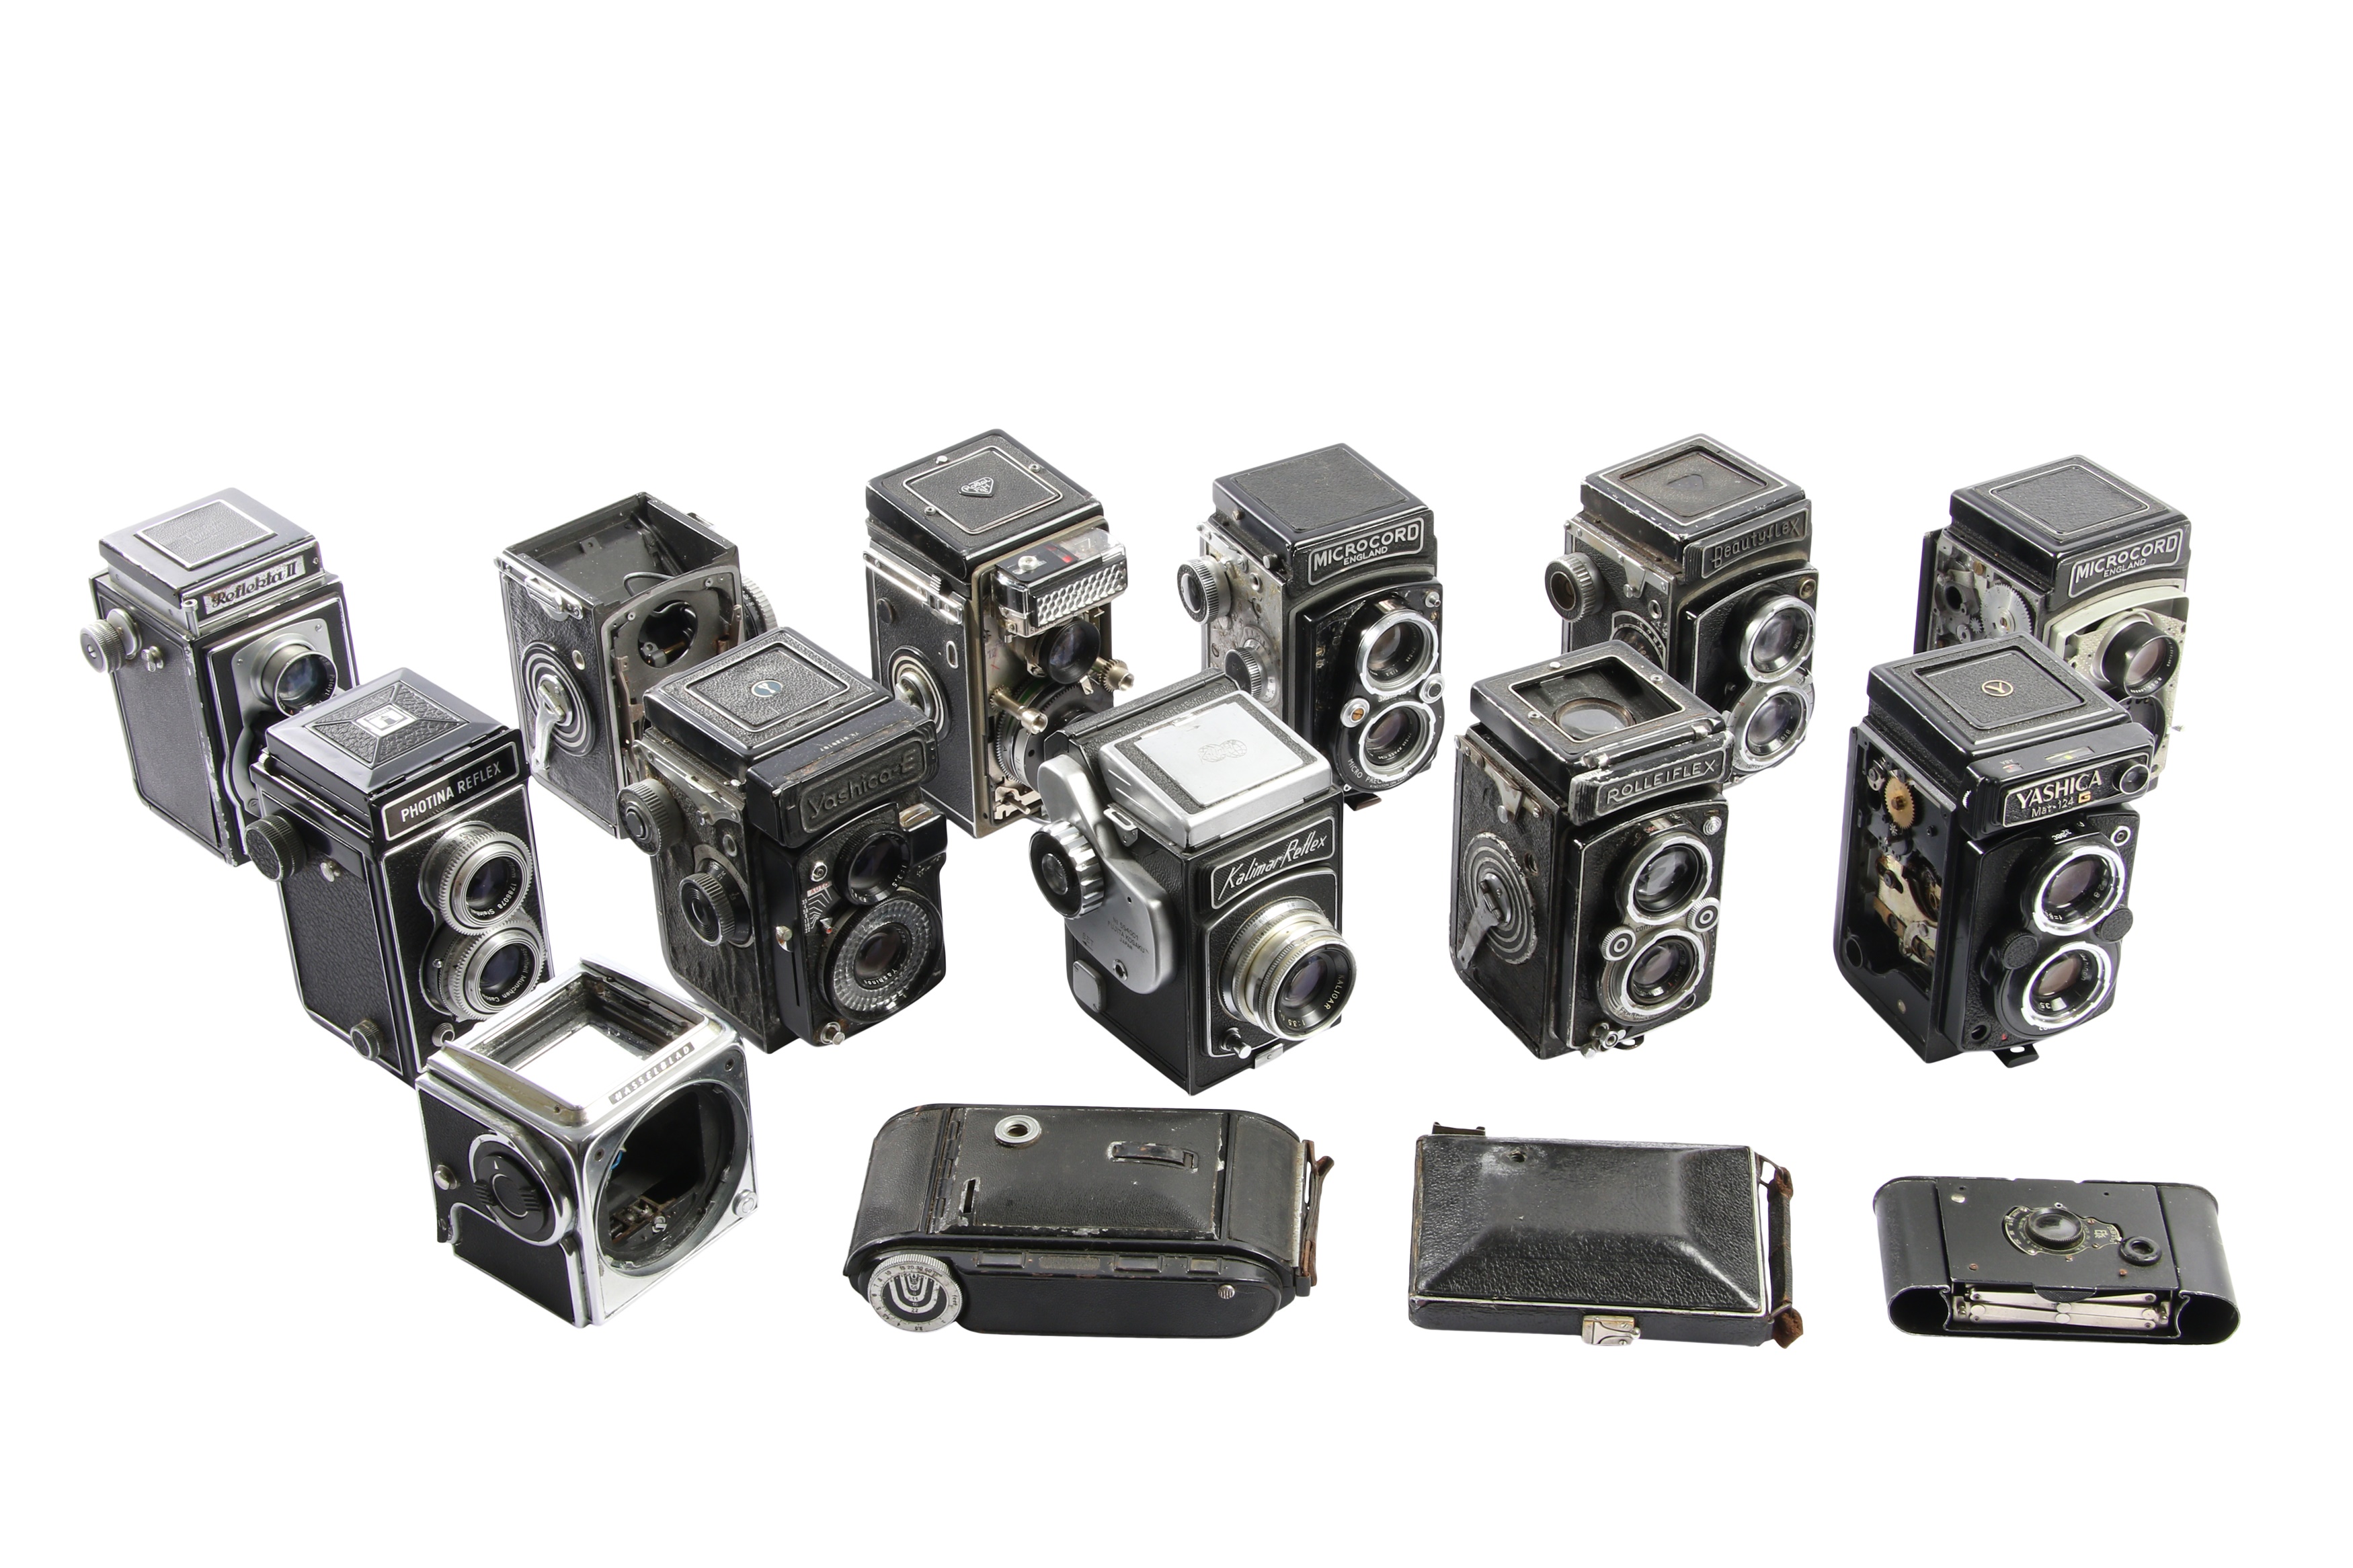 KW Patent Etui Folding Camera & A Selection of TLR Cameras & Parts.